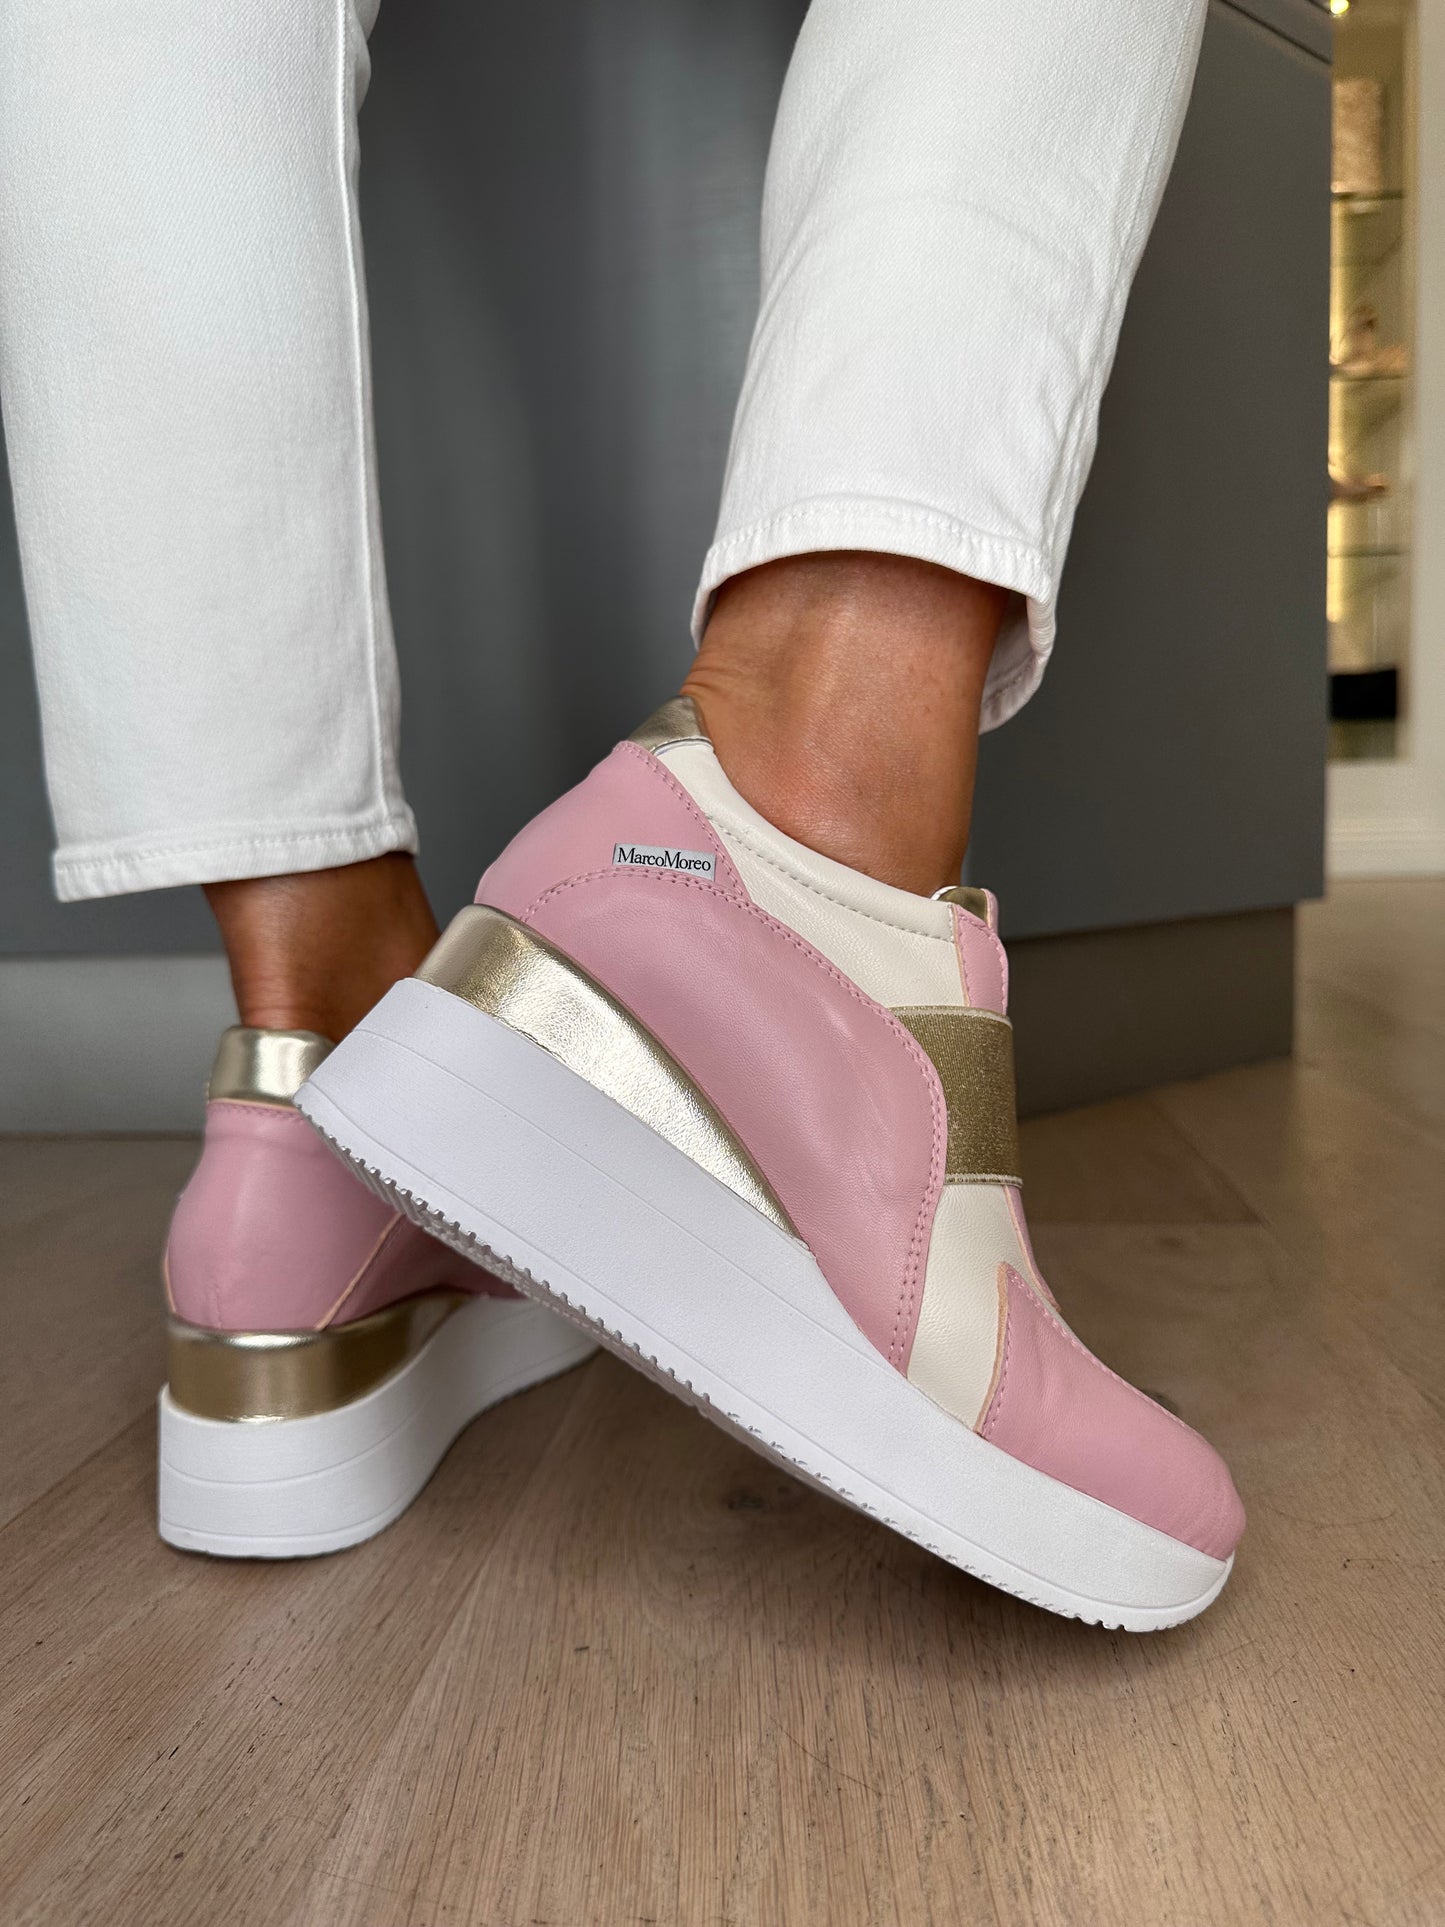 Marco Moreo - Alene Soft Candy Pink & Cream Slip On Wedge Shoe With Gold Trim